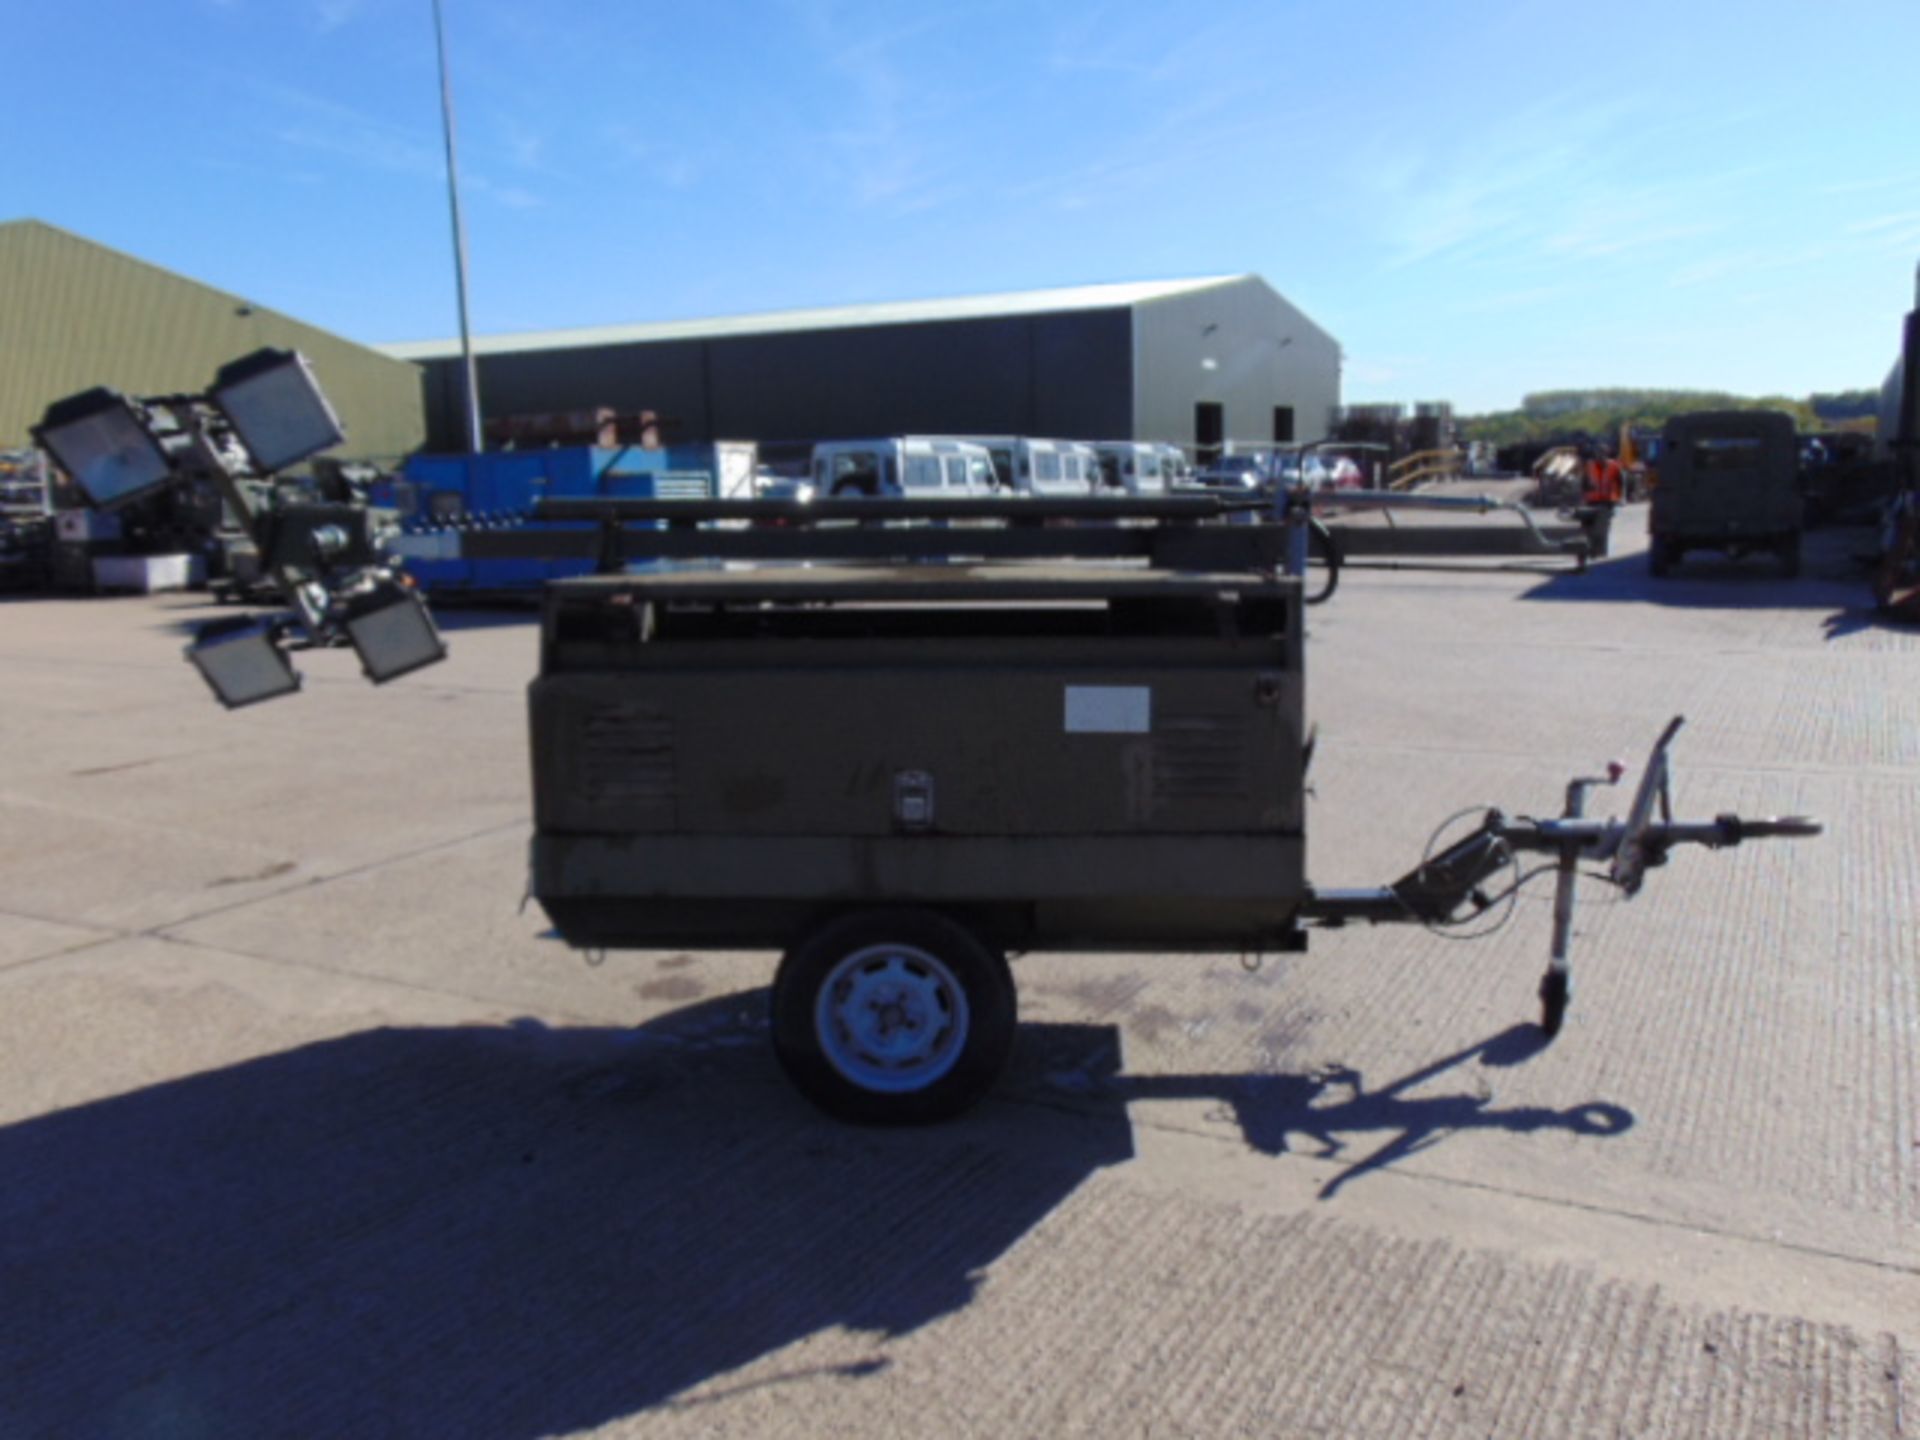 HyLite Lister Petter powered Trailer Mounted Lighting Tower - Image 5 of 23